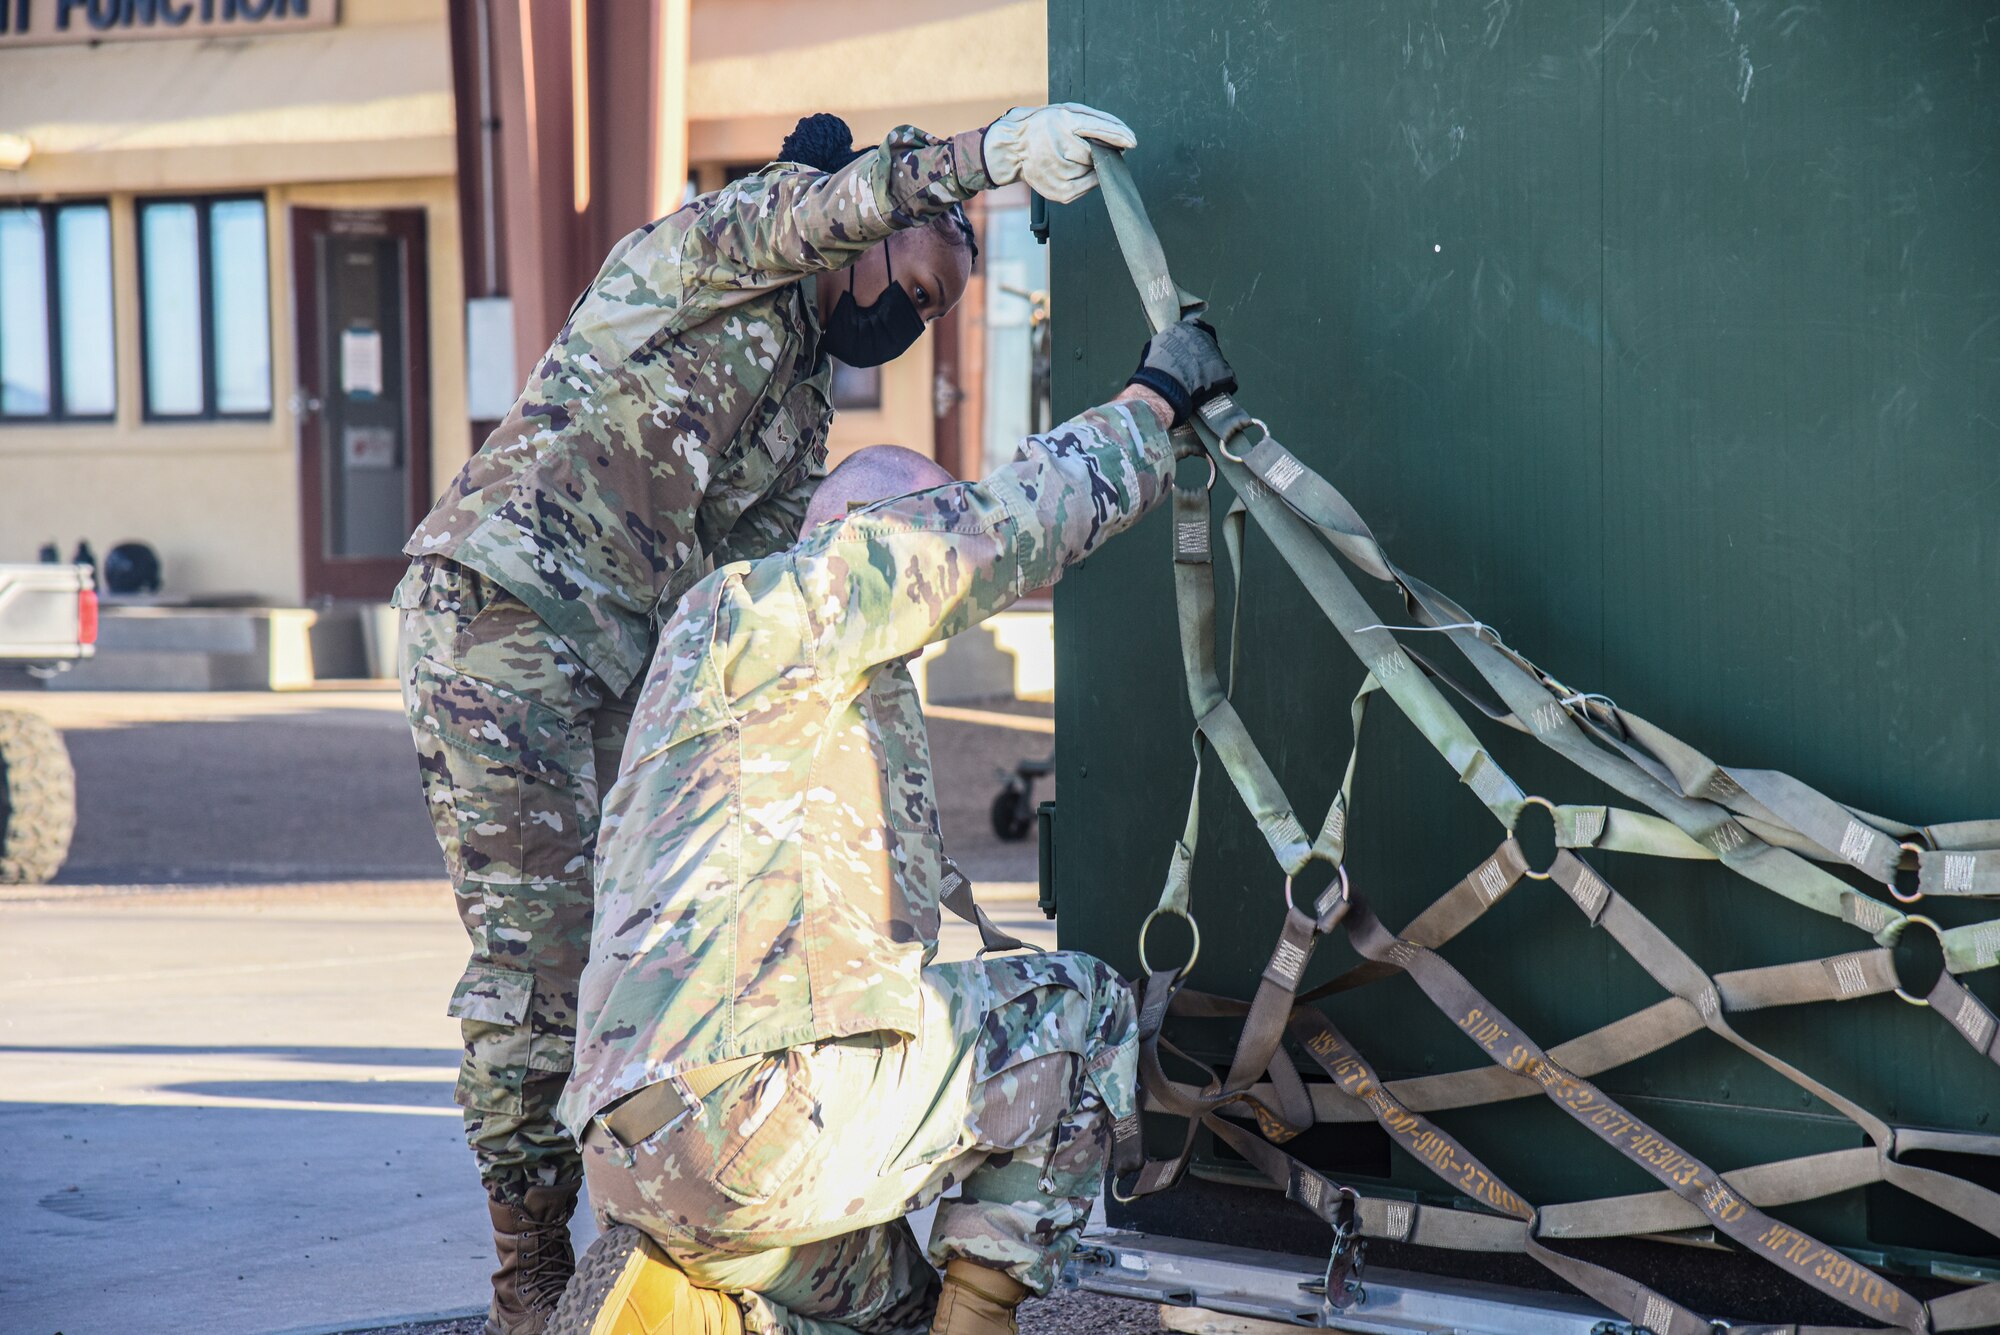 Pictured above is two Airmen strapping a cargo net to a container.